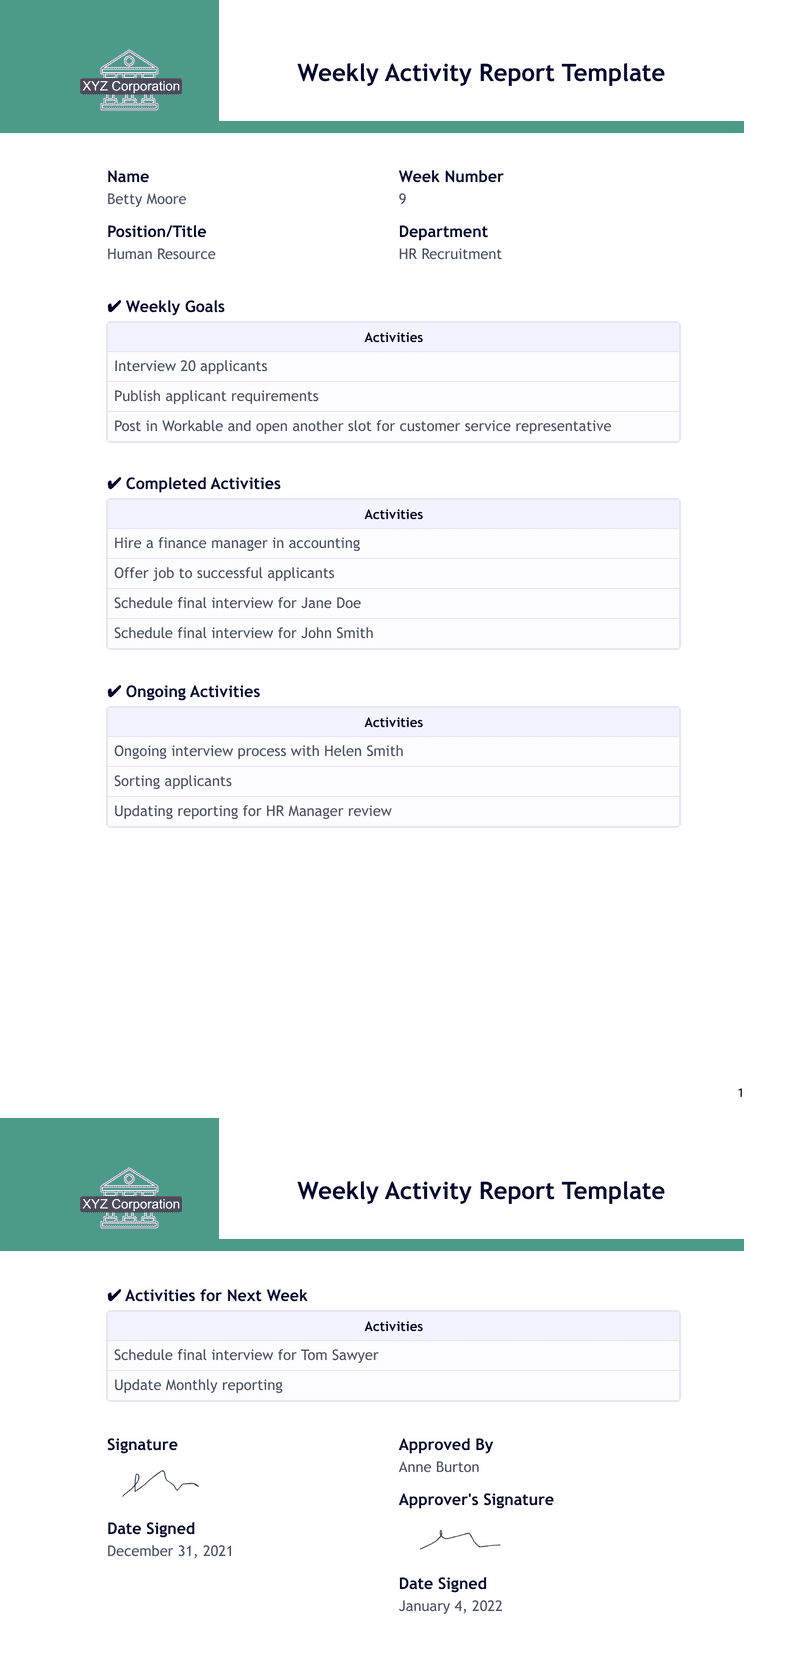 PDF Templates: Weekly Activity Report Template